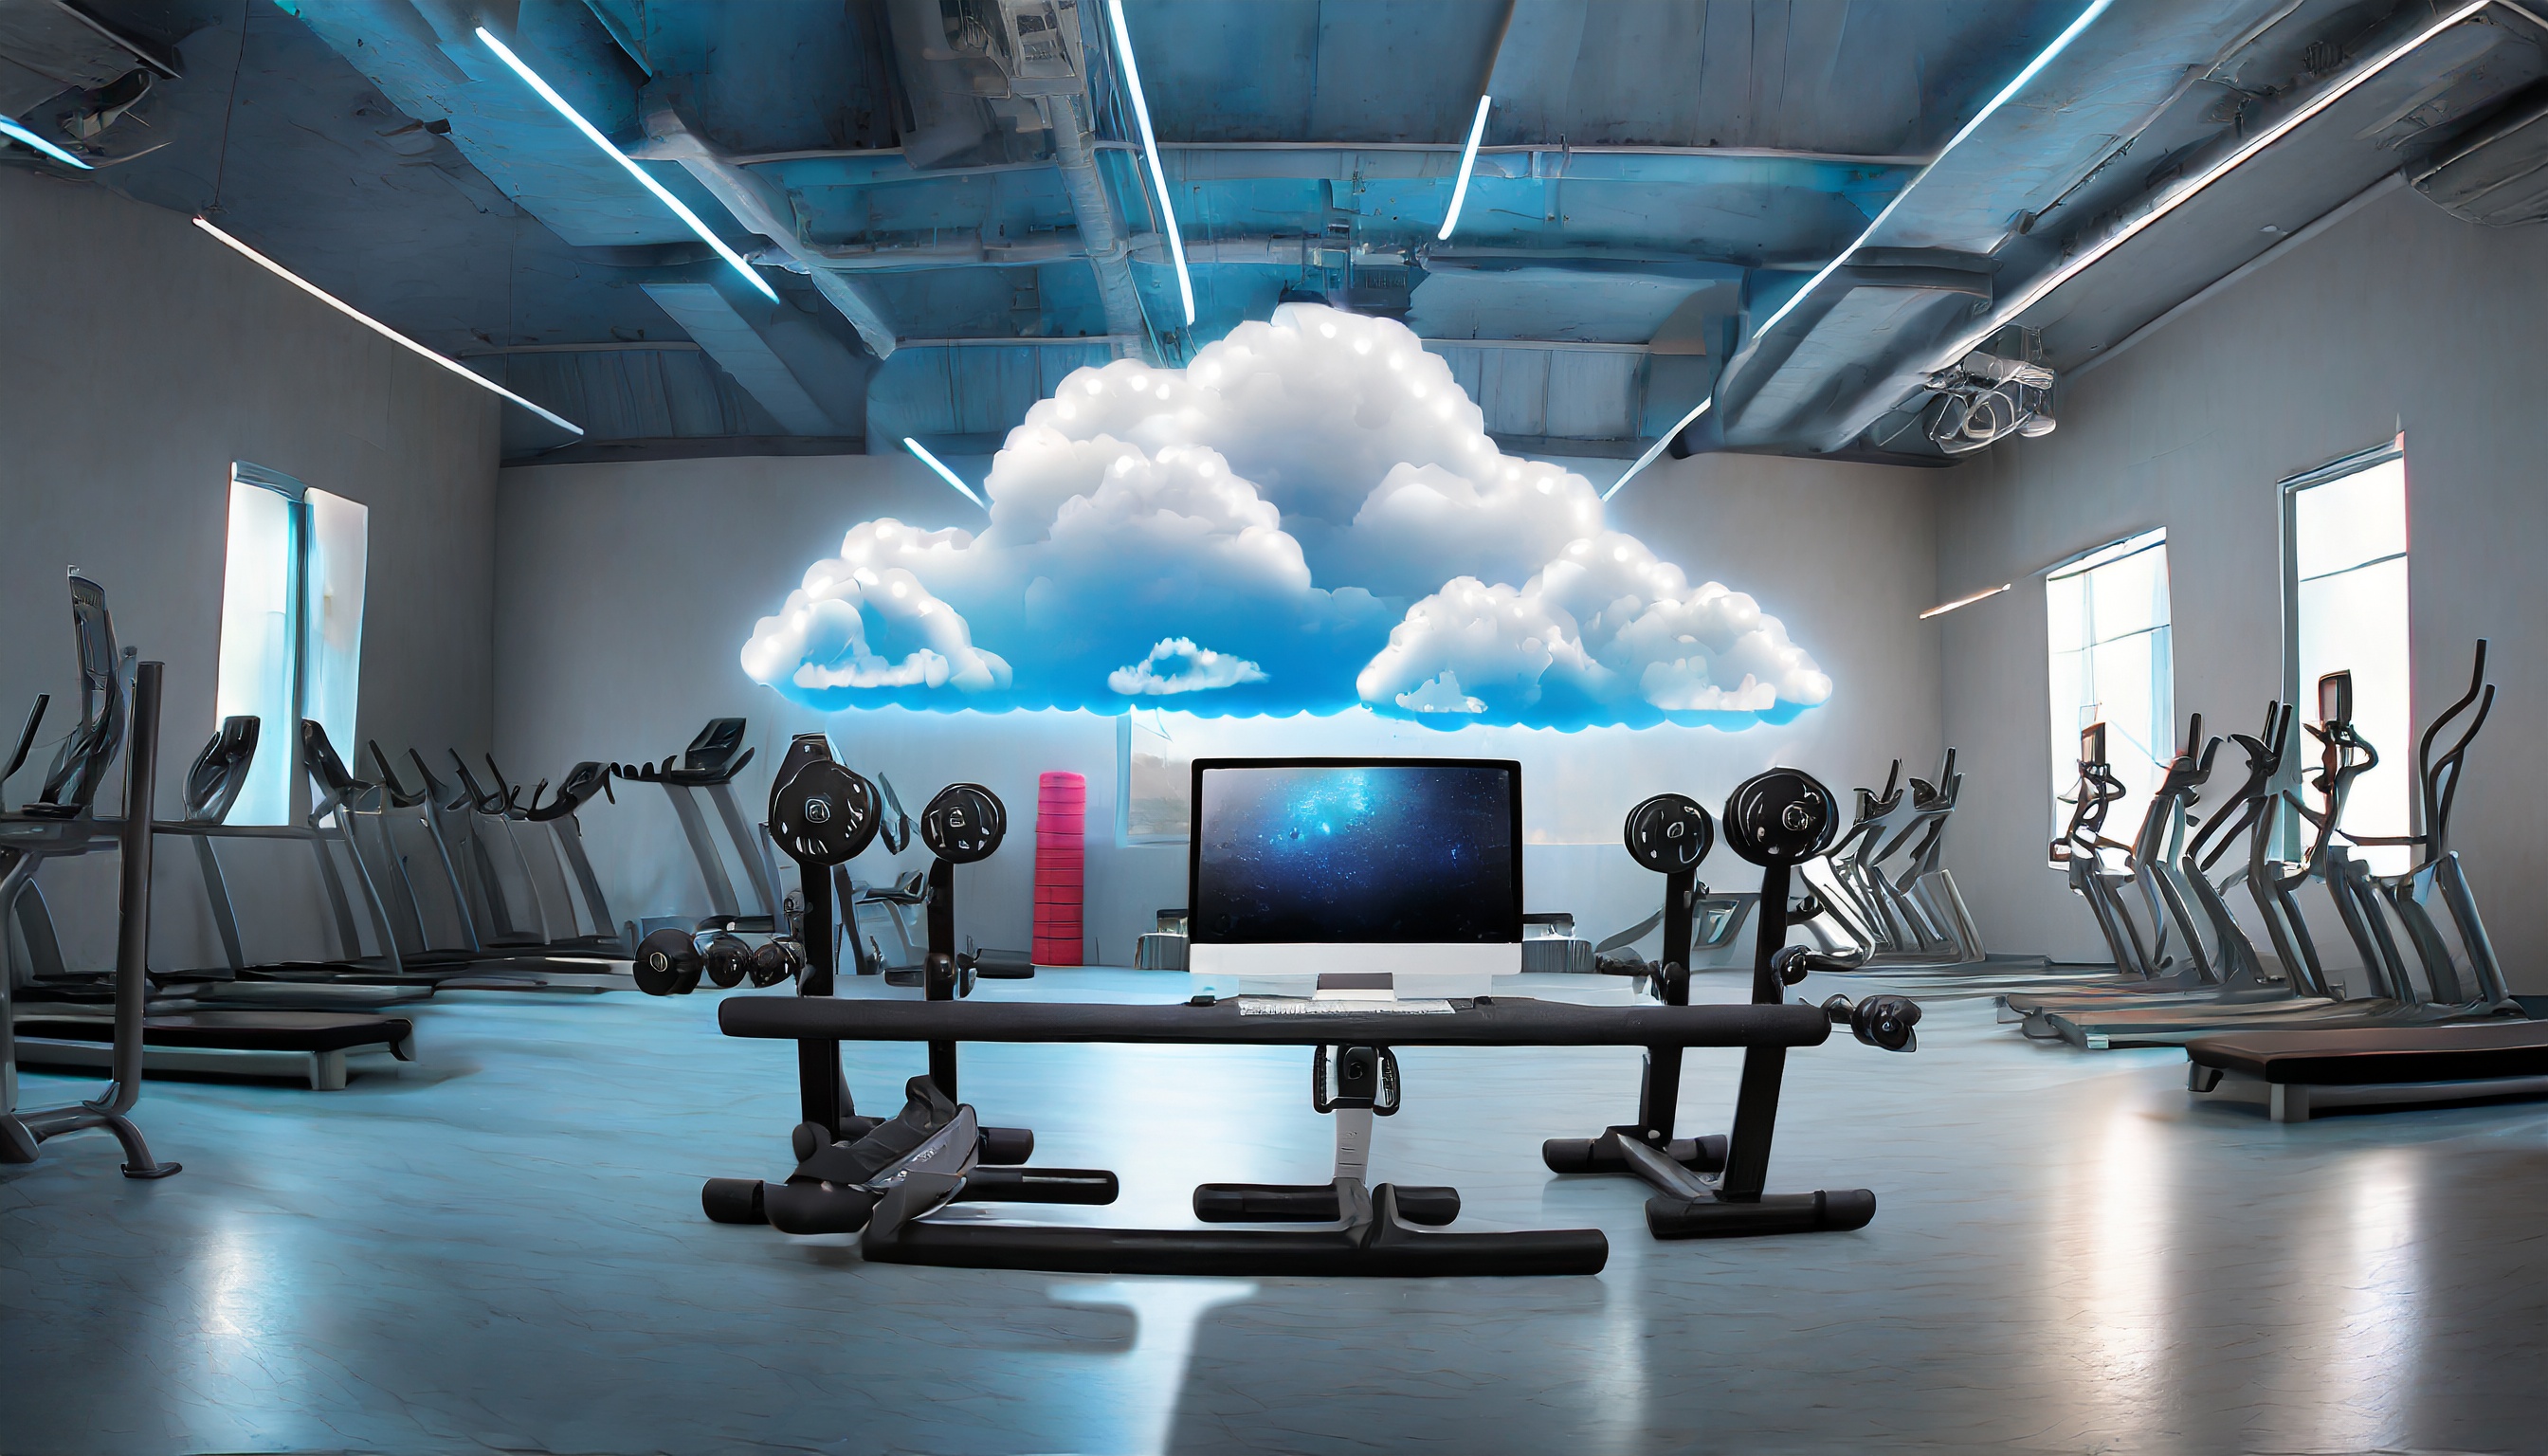 Firefly_a_desktop_computer_with_a_gym_in_the_background_and_fitness_equipment__Several_clouds_connec.jpg